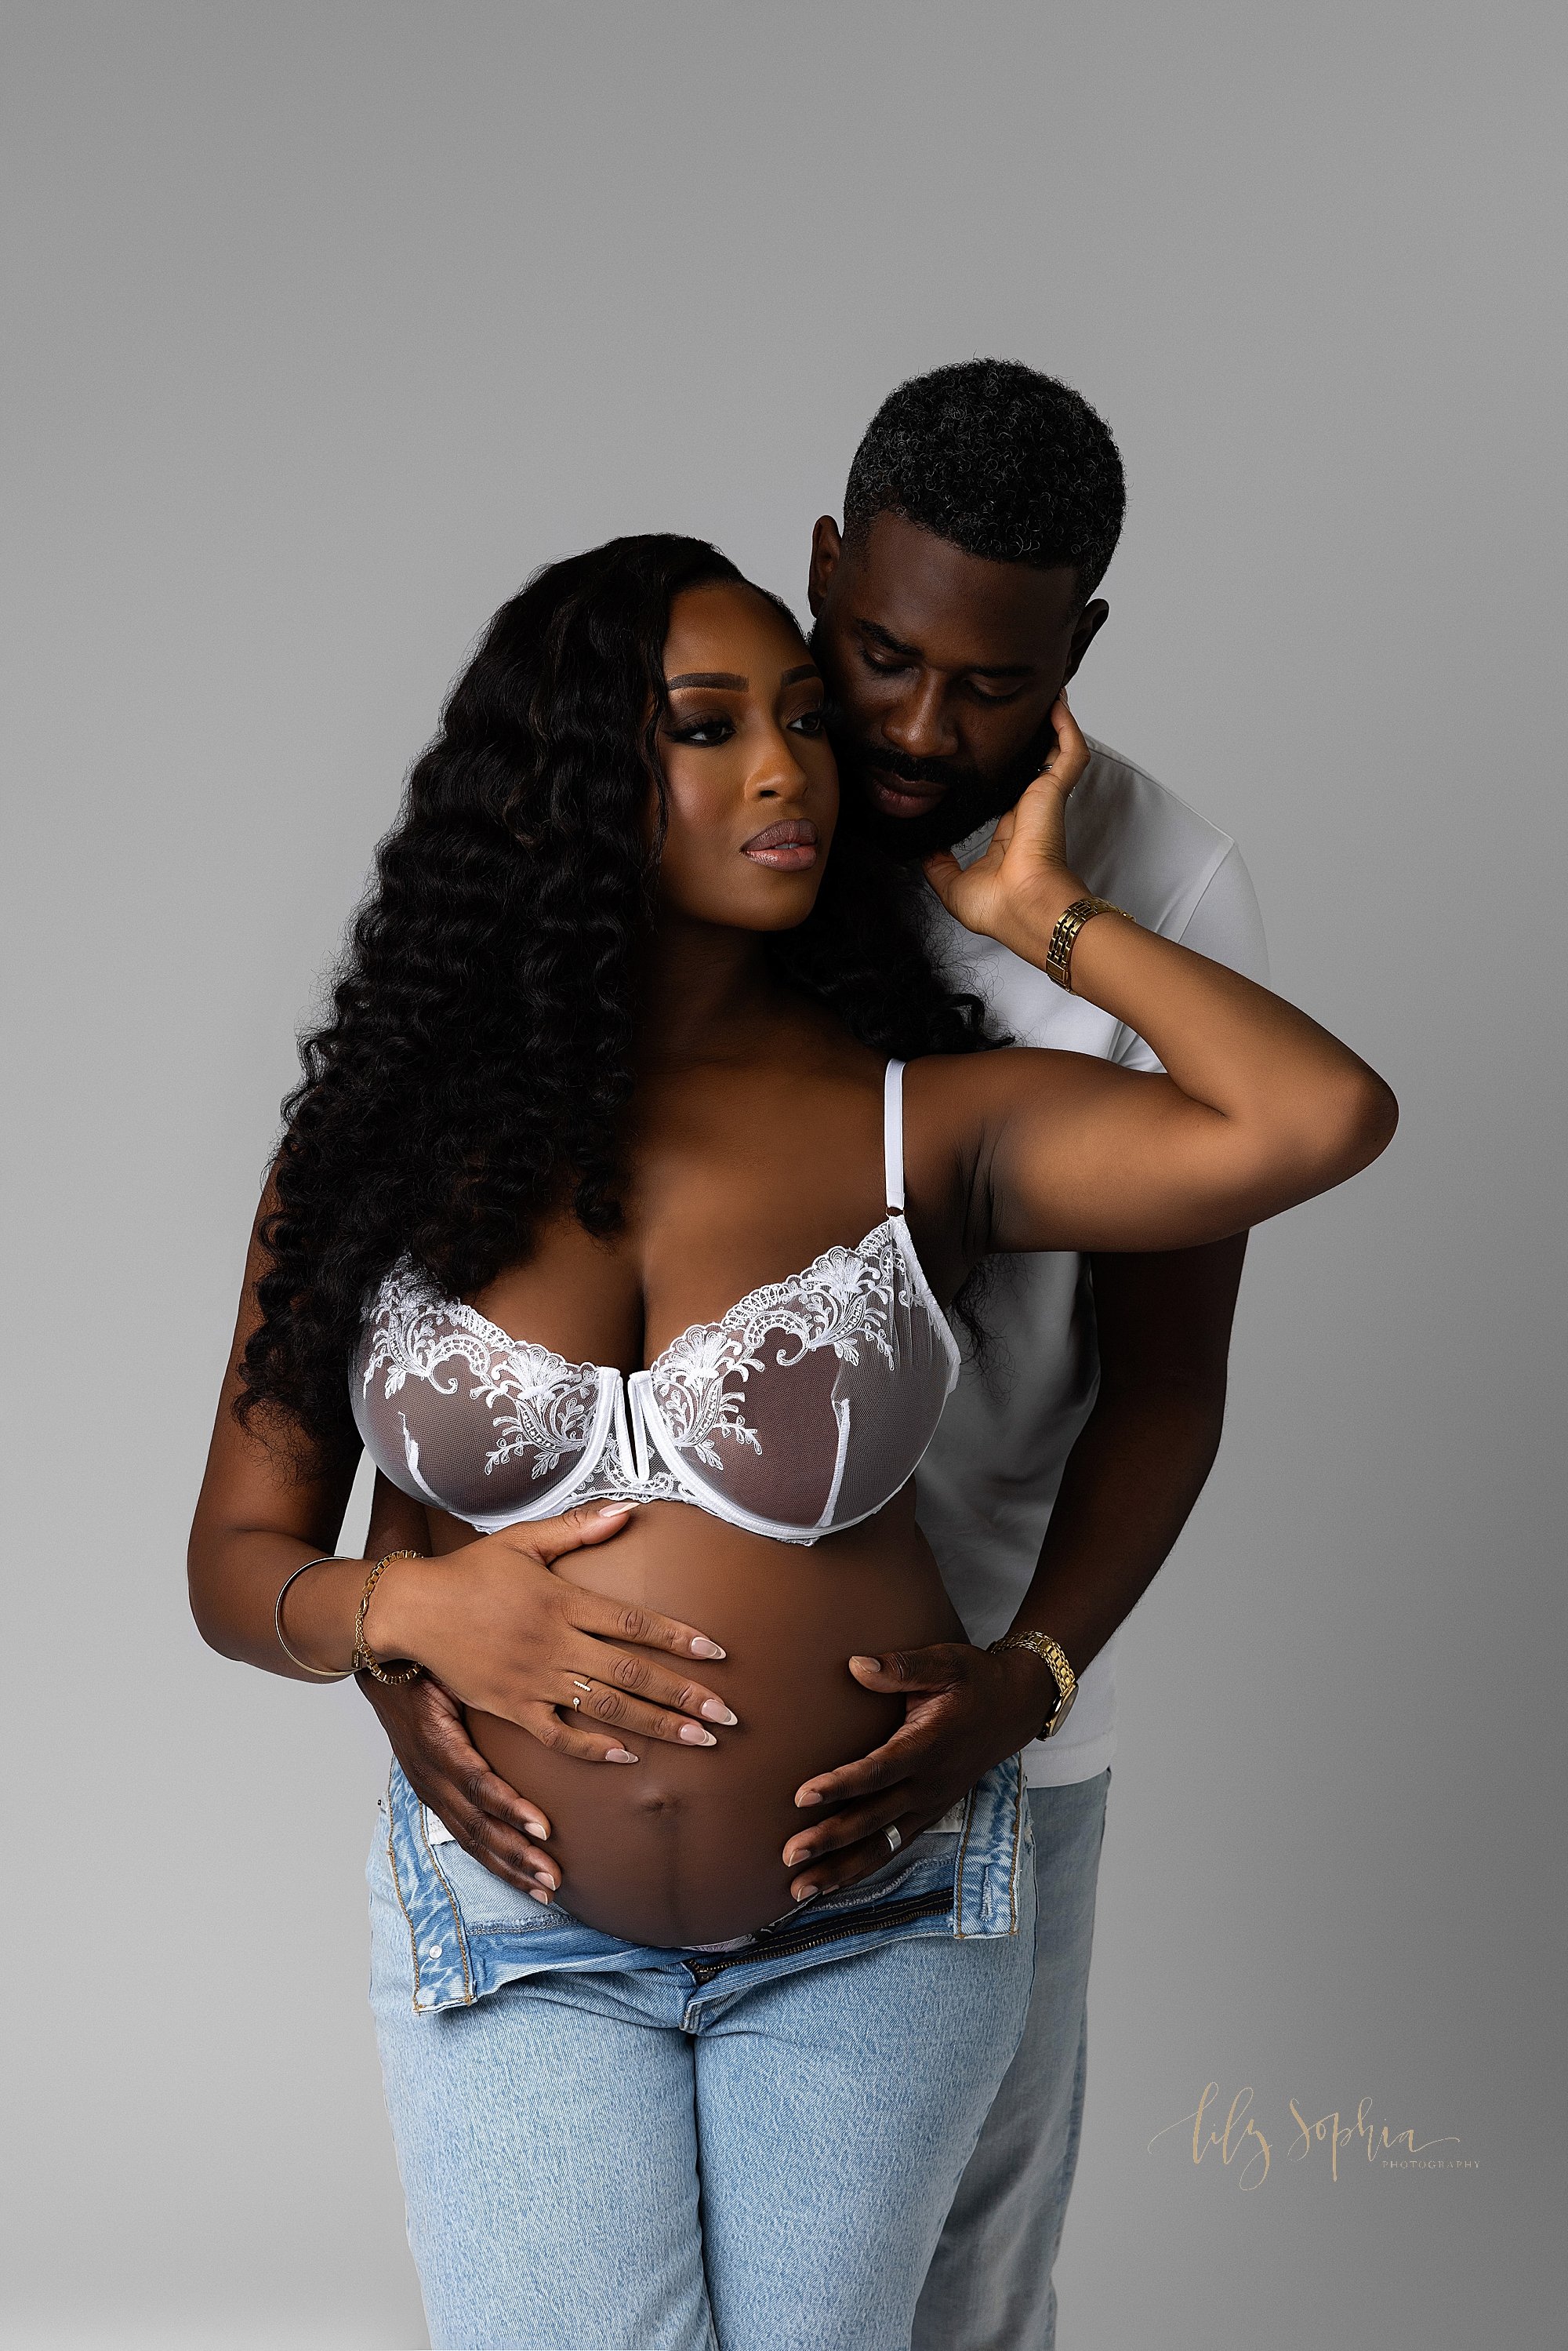  Modern maternity session with an African-American expectant mother wearing a white bra and unzipped blue jeans as her husband stands behind her and wraps his arms around her to place his hands on their child in utero as she reaches her left hand up 